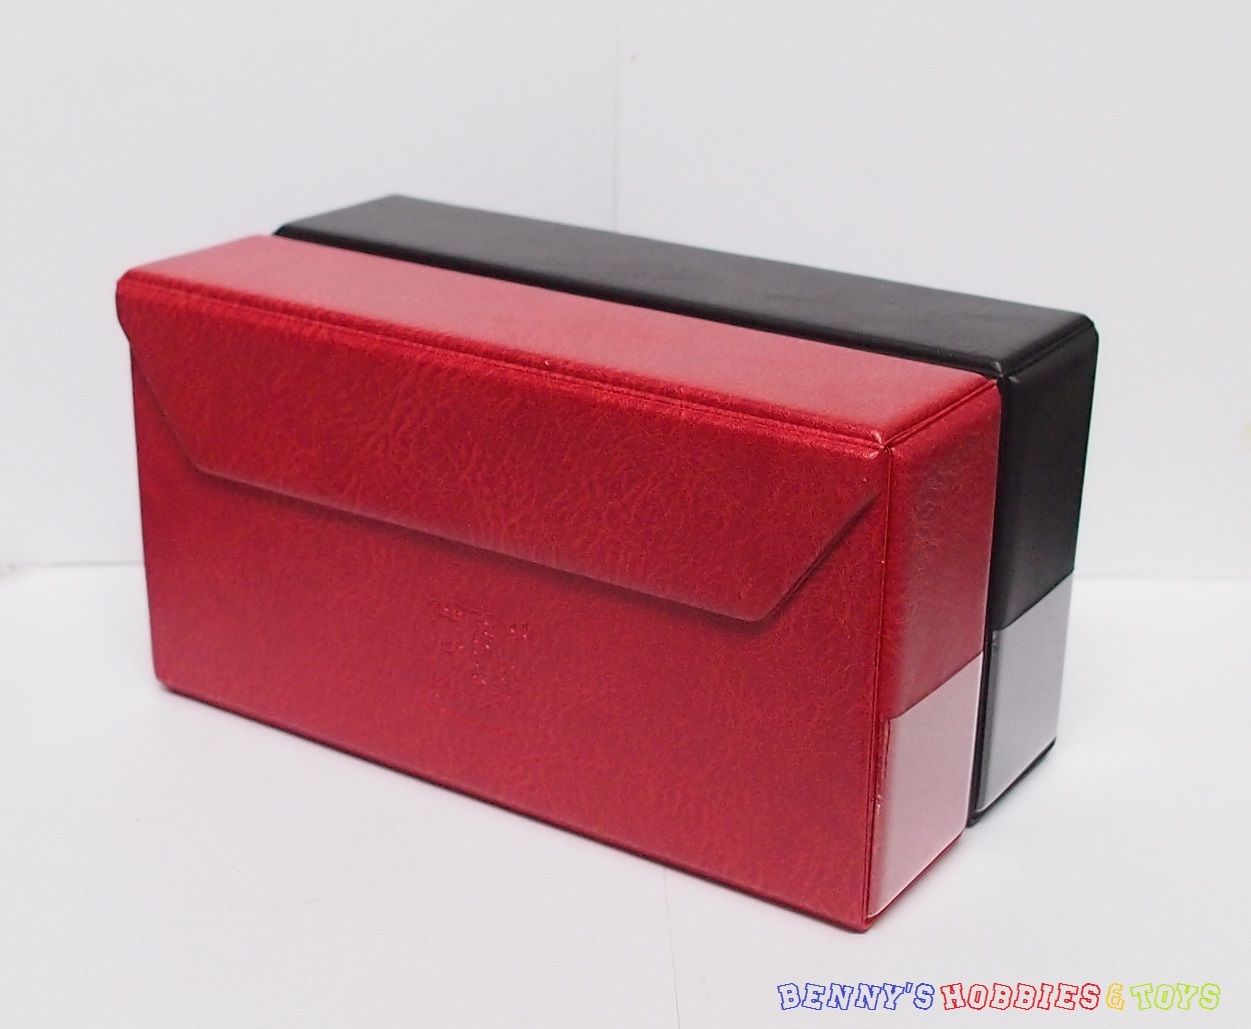 1 x New Storage Box / Case For PMG Graded Banknotes Currency Holder - 11.4cm Ht.